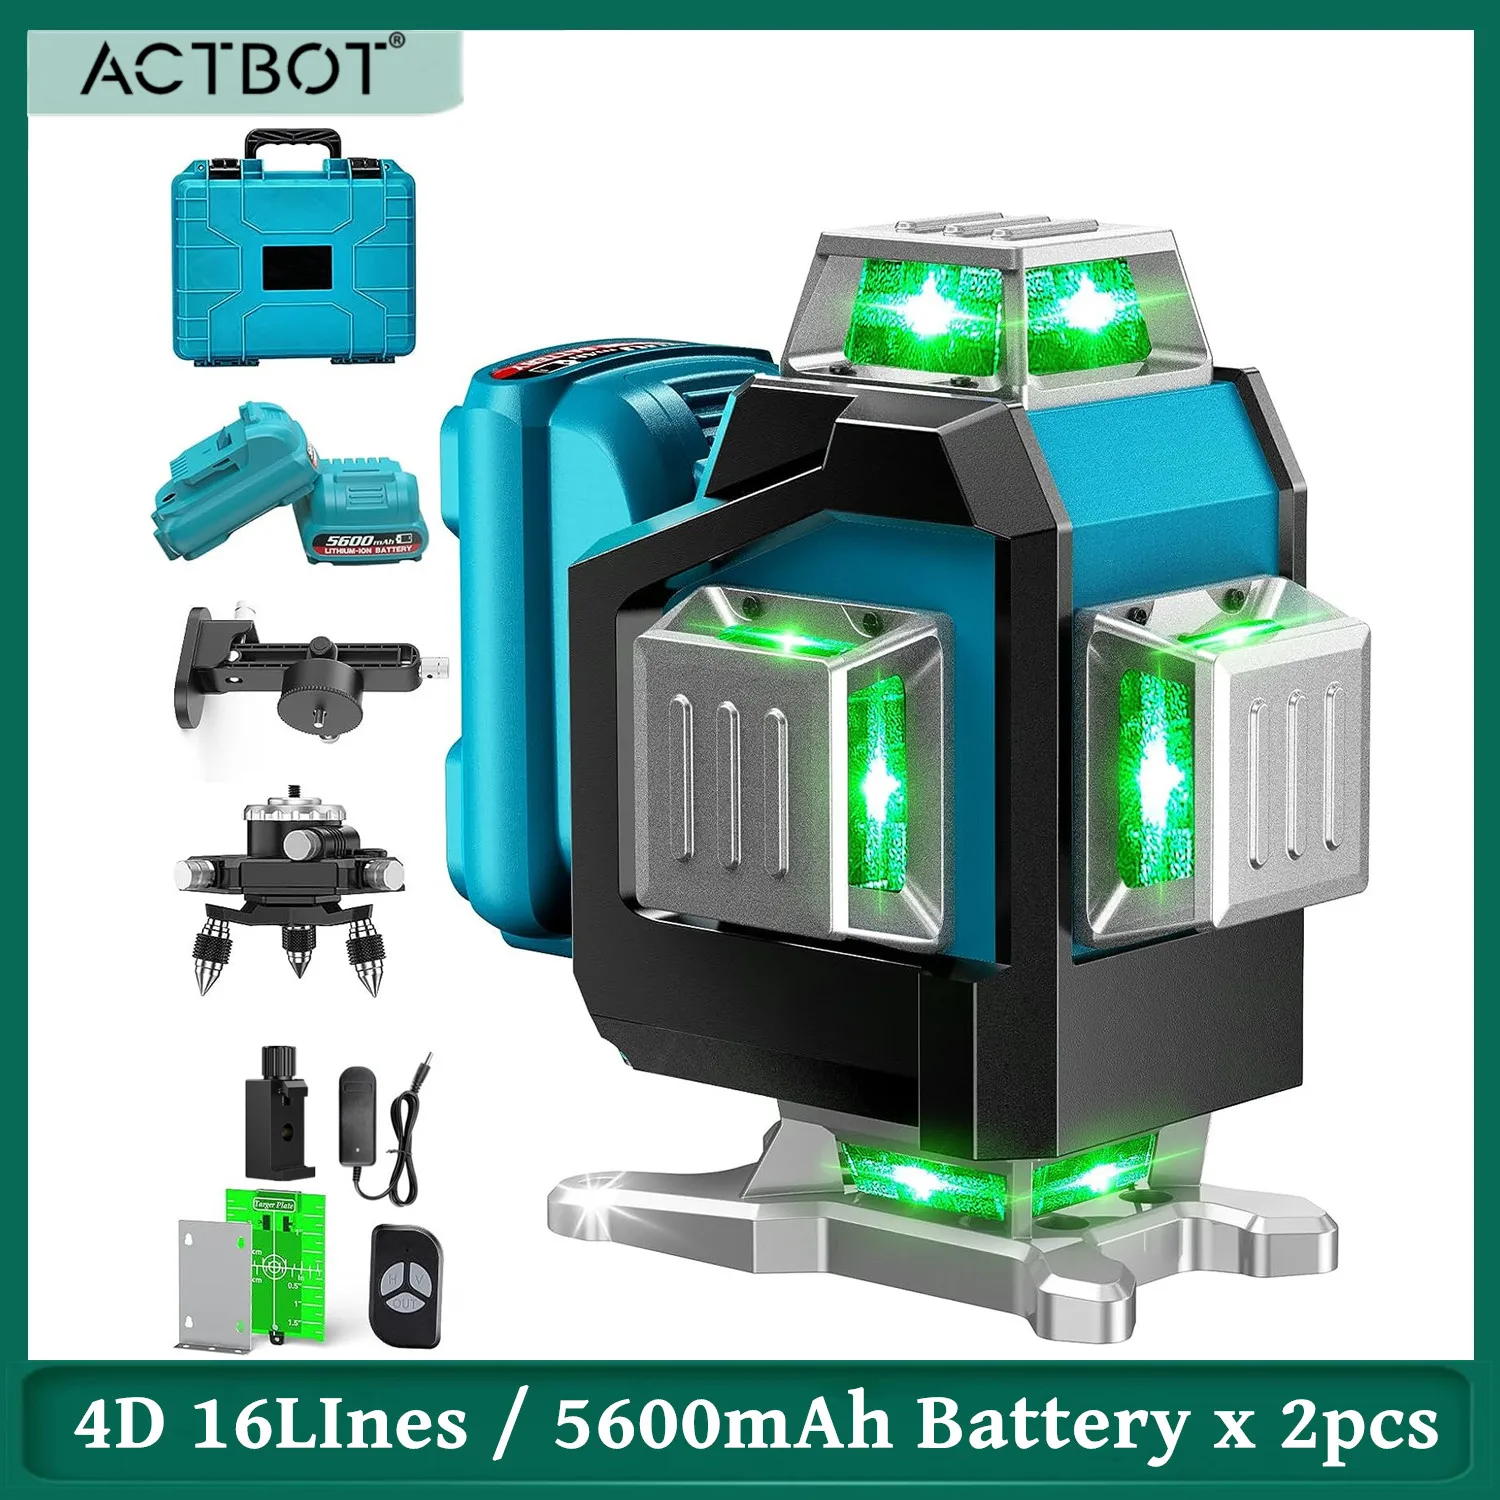 https://ae01.alicdn.com/kf/Scc59e48b604847ebb8e802cd8d286d45B/16-Lines-4D-Wireless-Laser-Level-360-Self-leveling-laser-levels-High-Power-Green-Laser-With.jpg